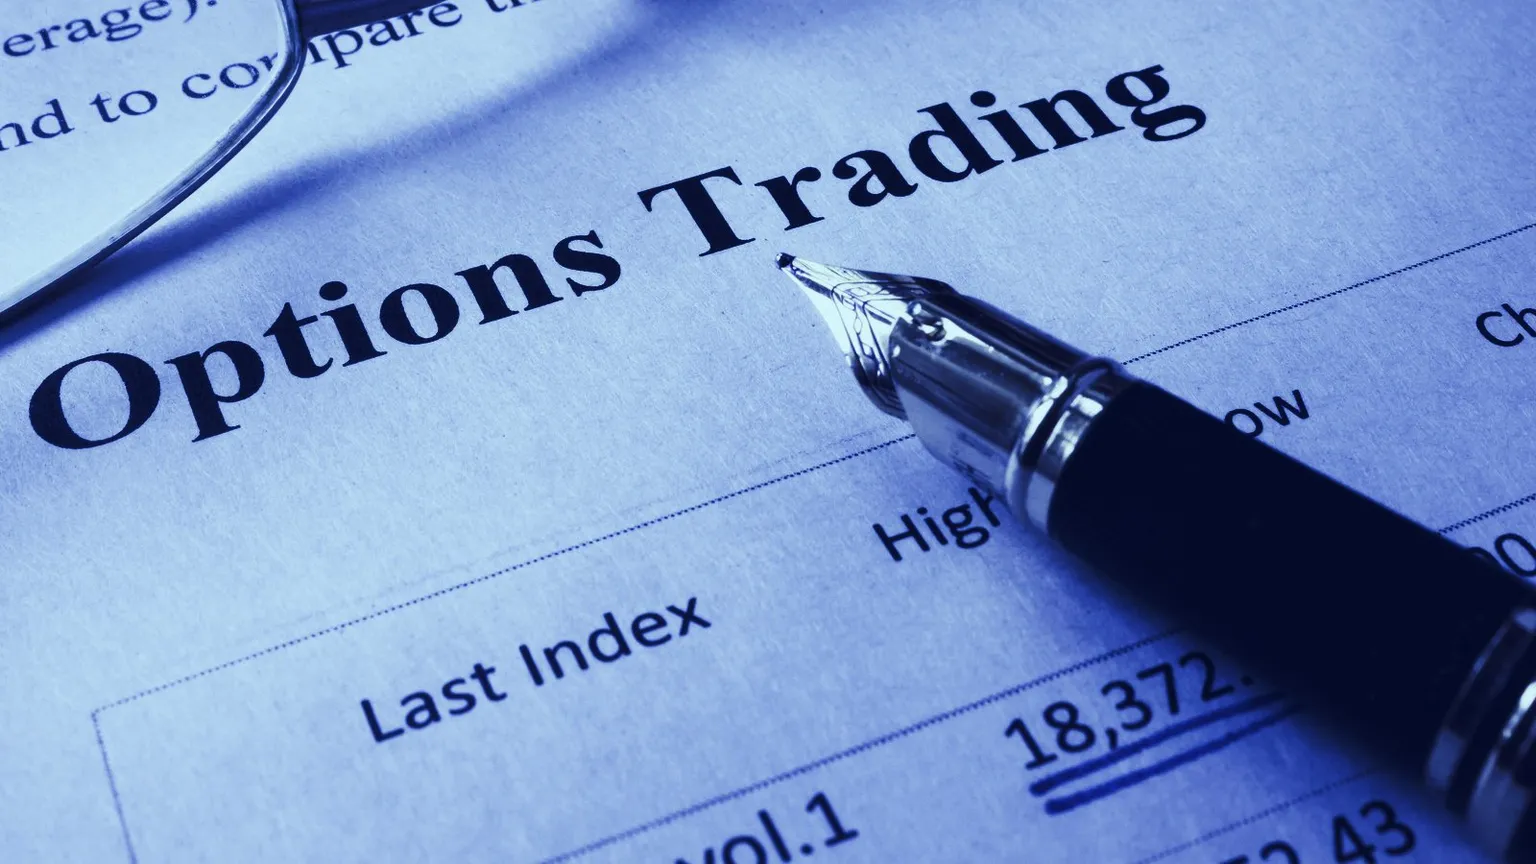 Options trading. Image: Shutterstock